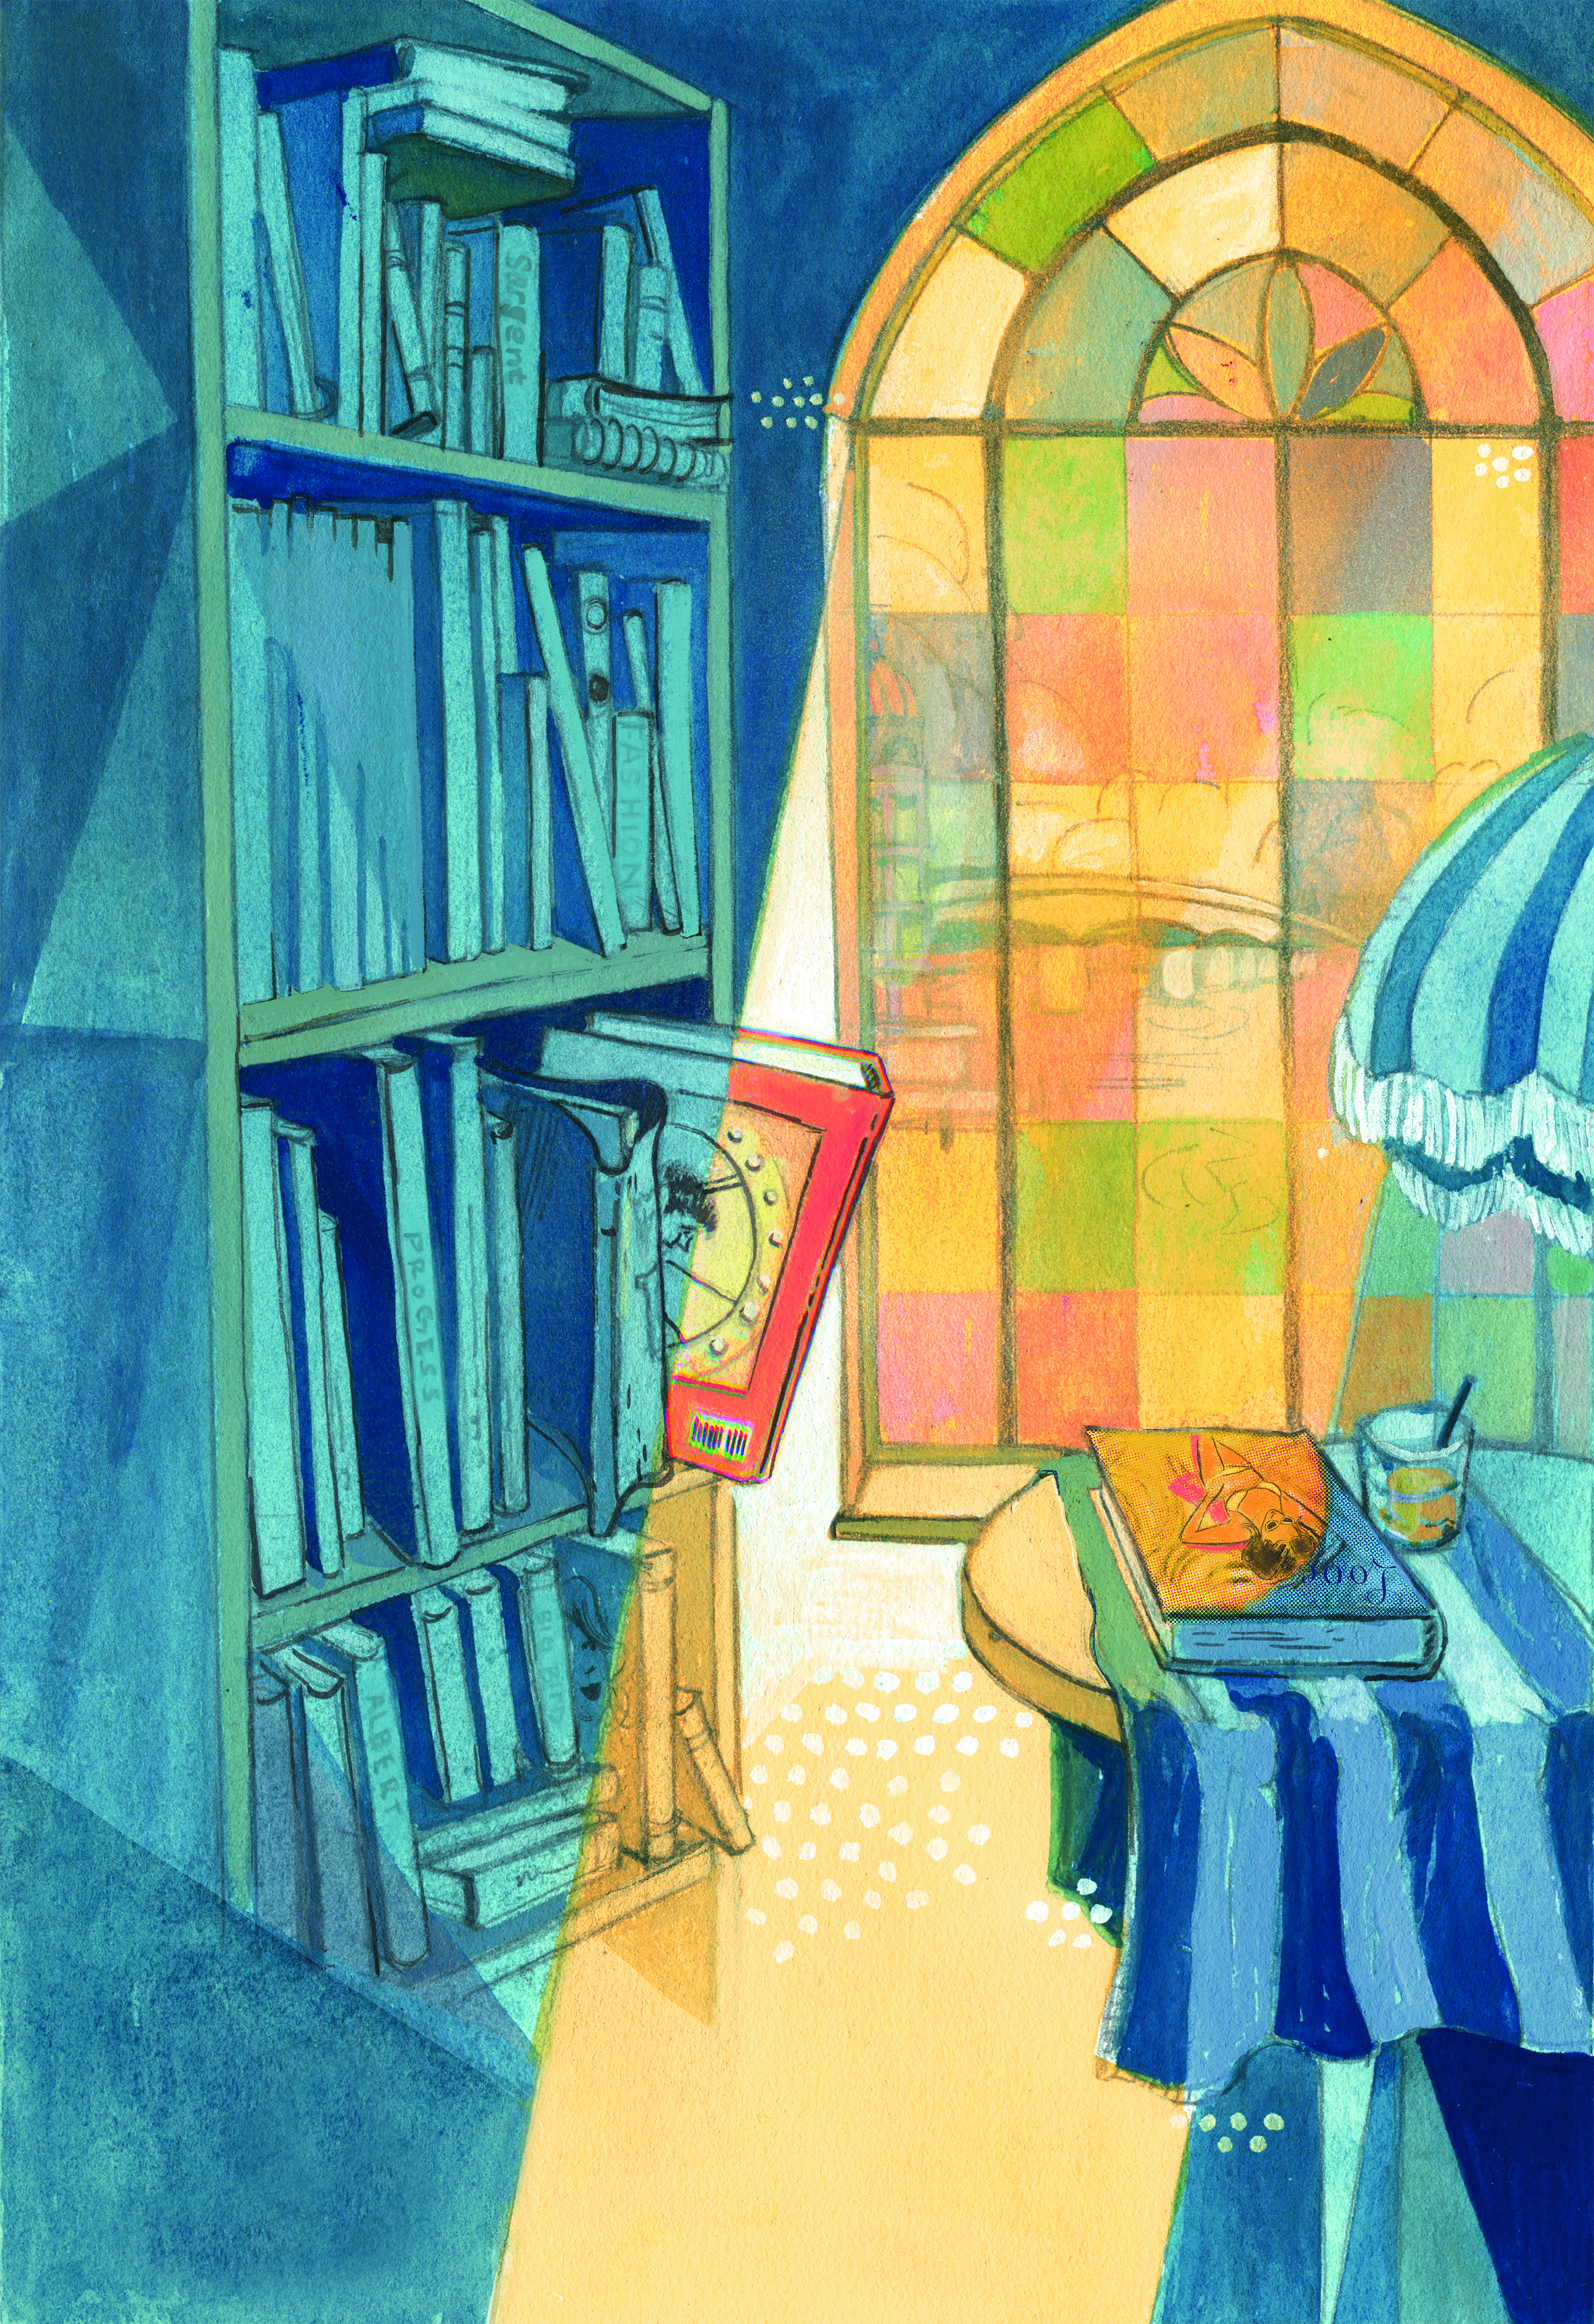 An original illustration by Oliver Dominguez of a ray of sun shining through a stained glass window, into a shadowy library.